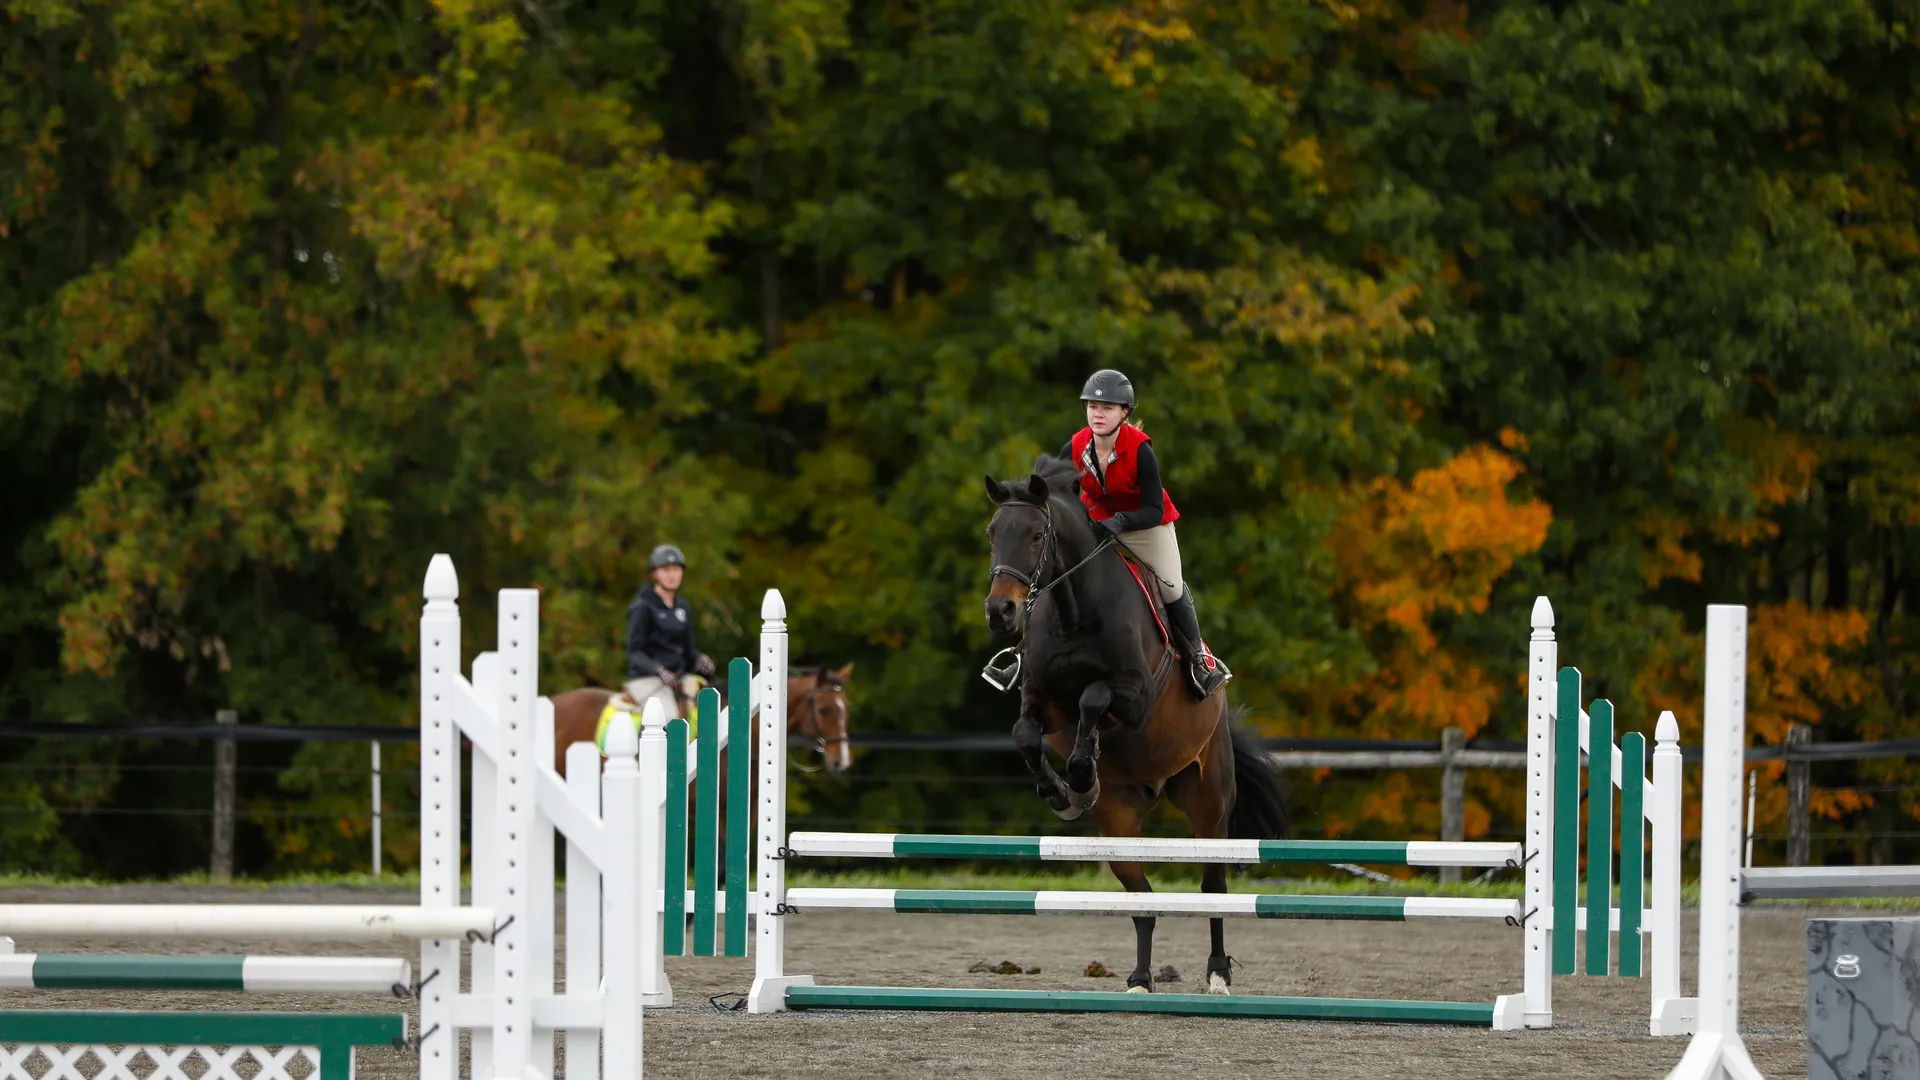 Houghton equestrian student riding her horse over jump in outdoor arena.